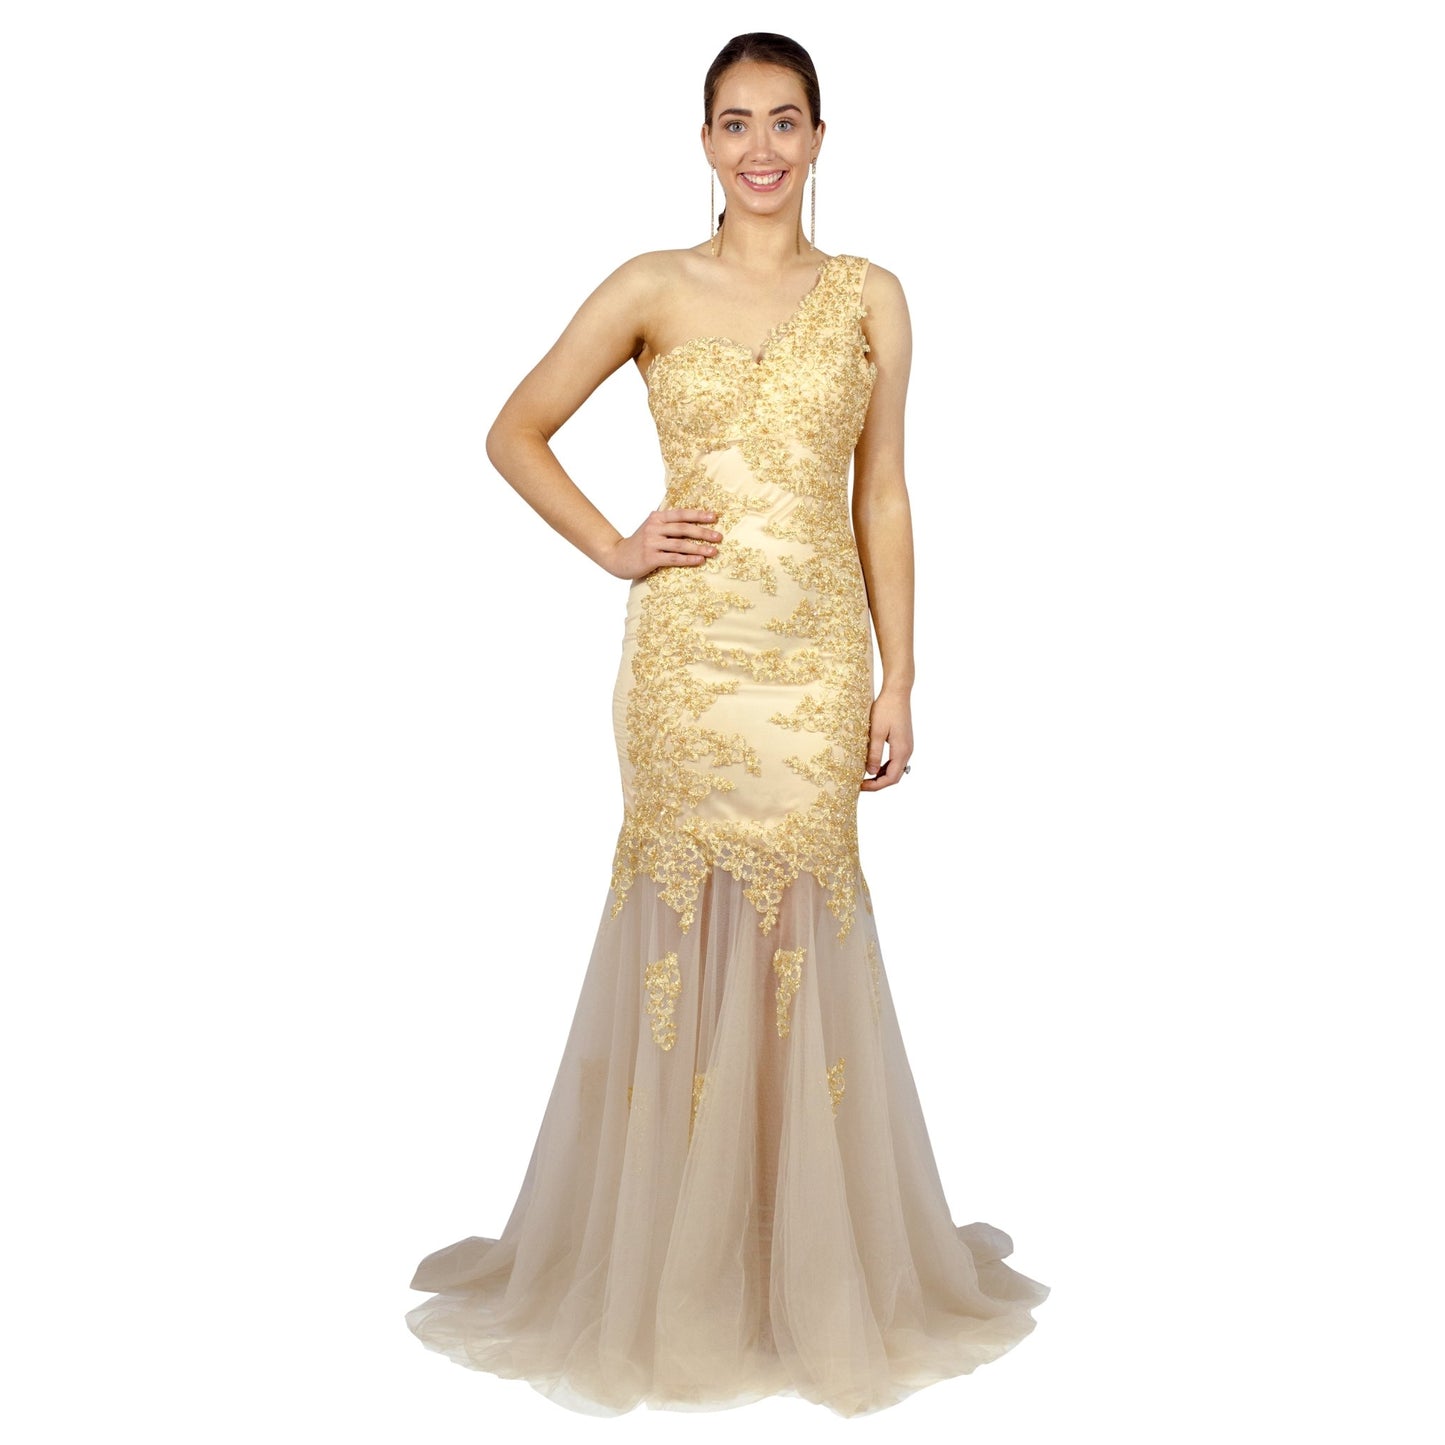 OTTILIA | One Shoulder Beaded Gold Fishtail Formal Dress - All Products Envious Bridal